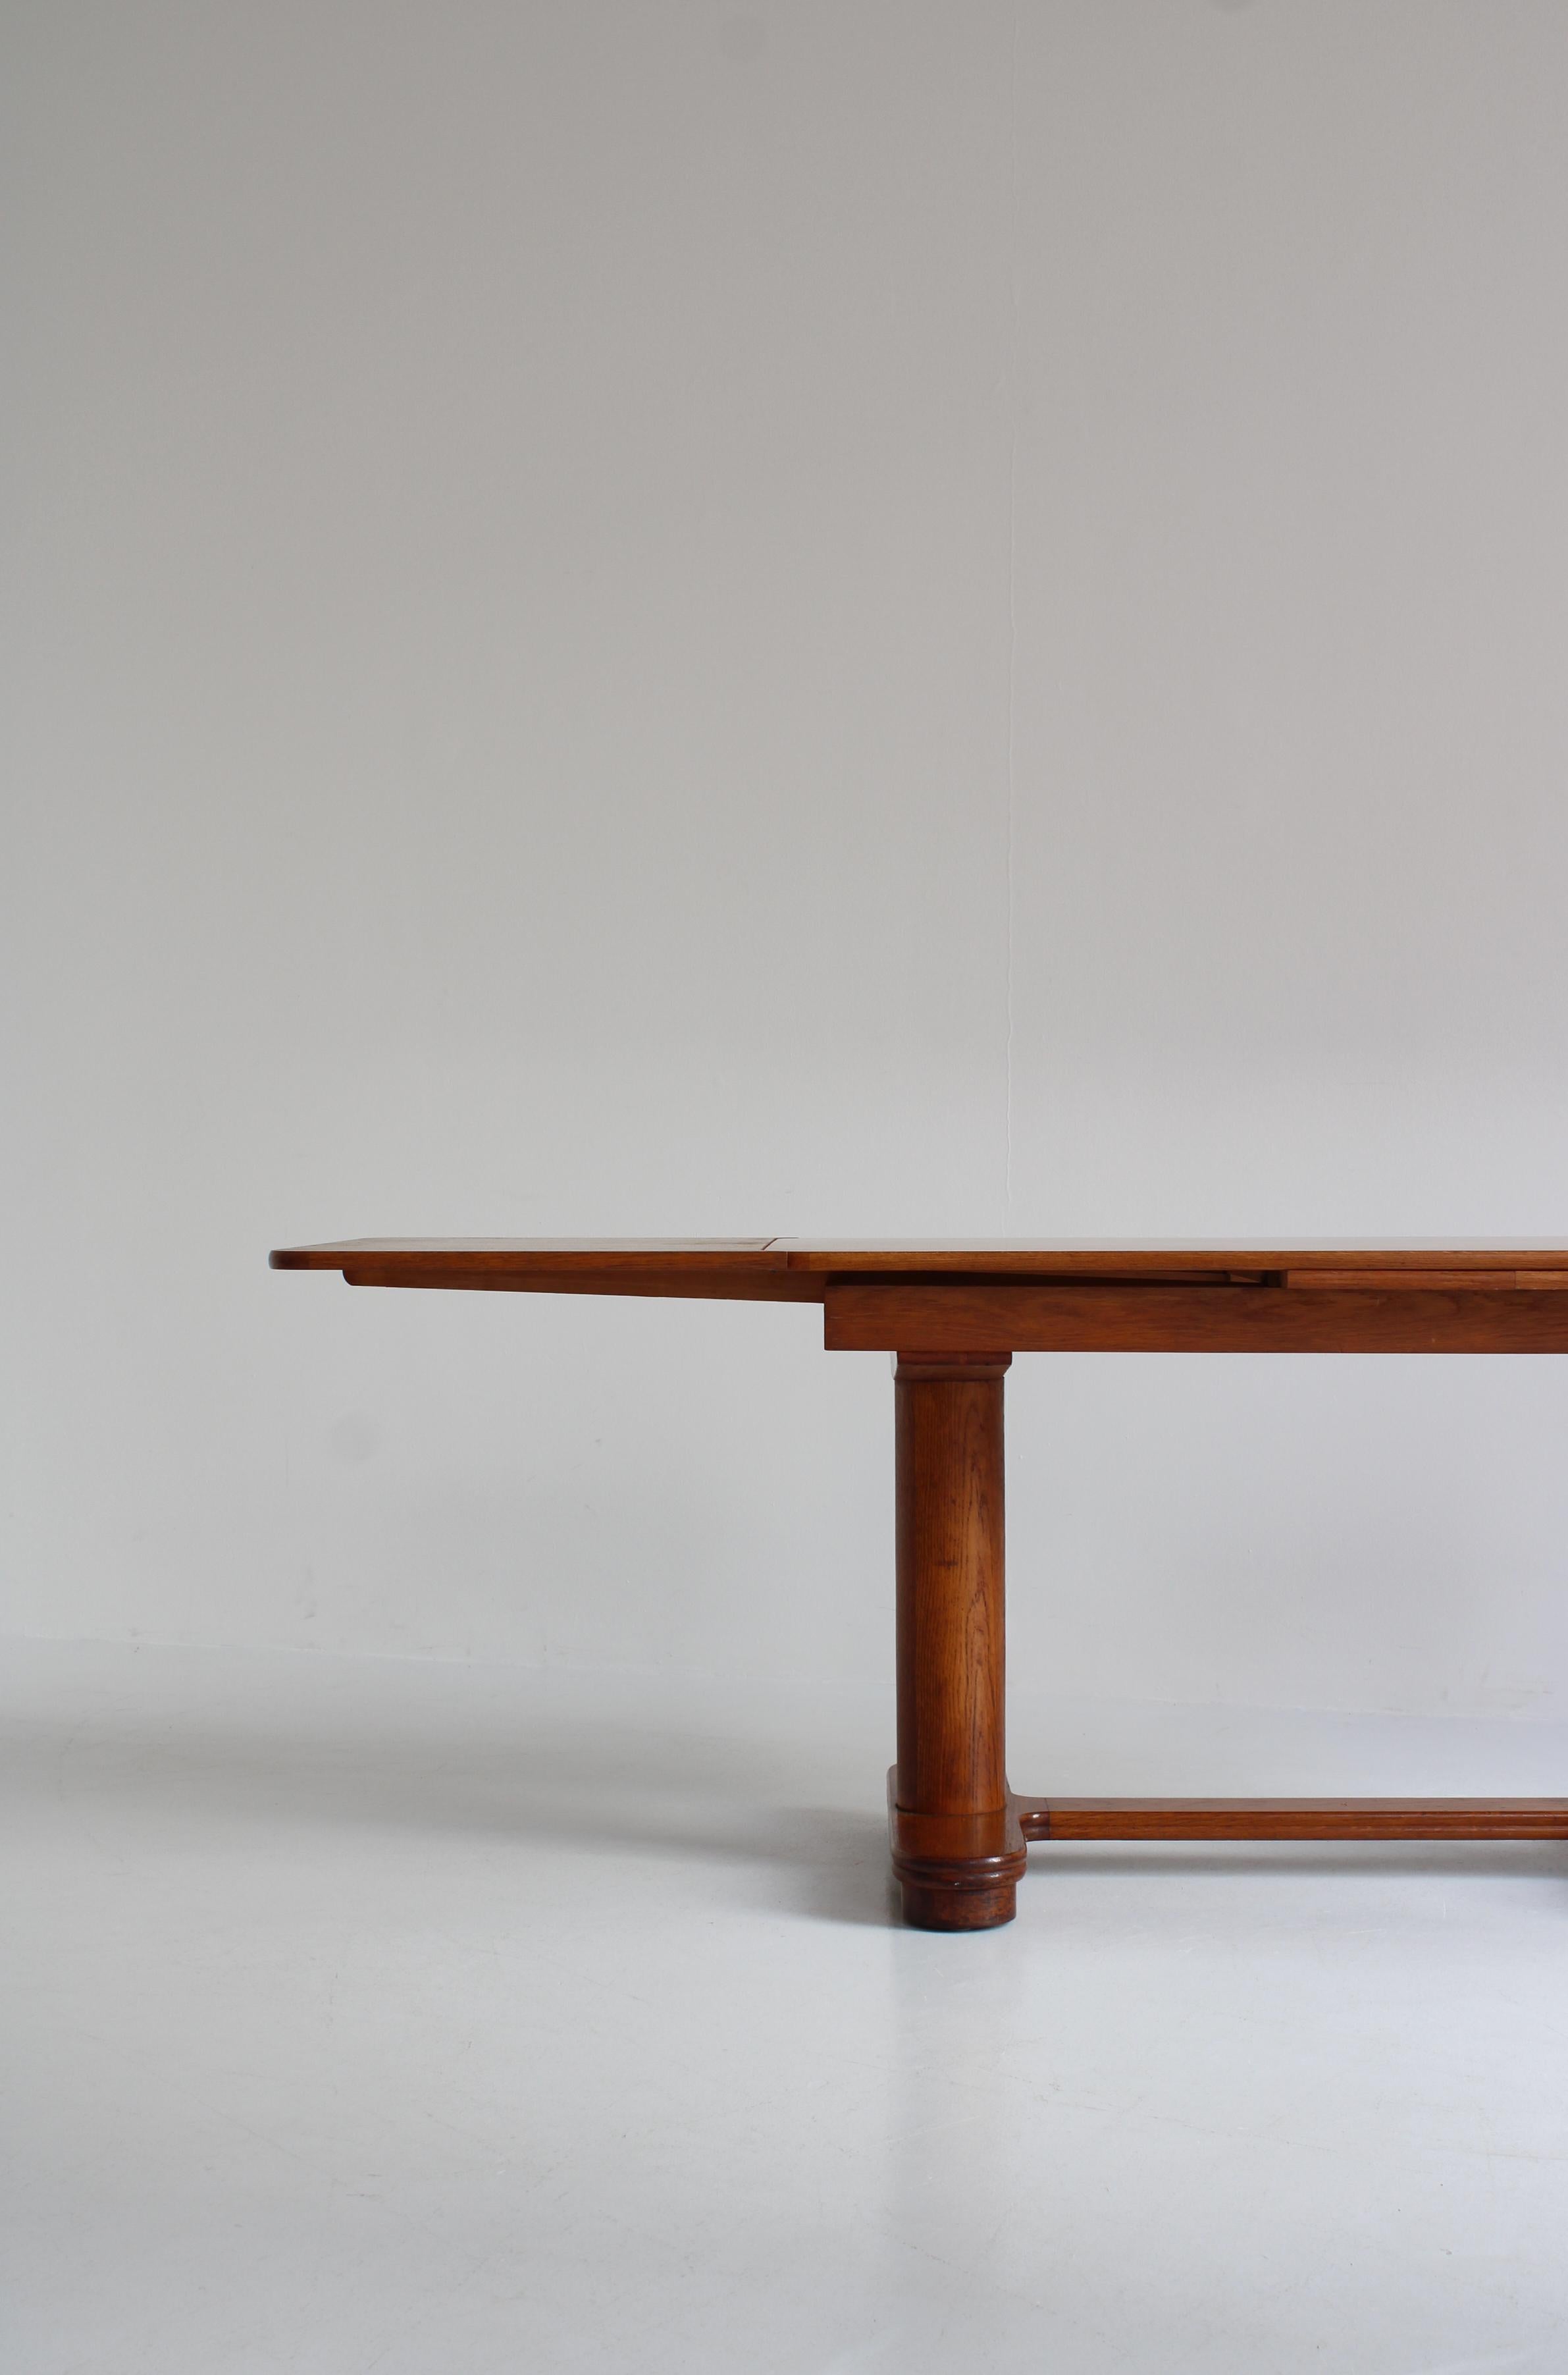 Art Deco Table by Danish Cabinetmaker in Patinated Oak, 1930s For Sale 8